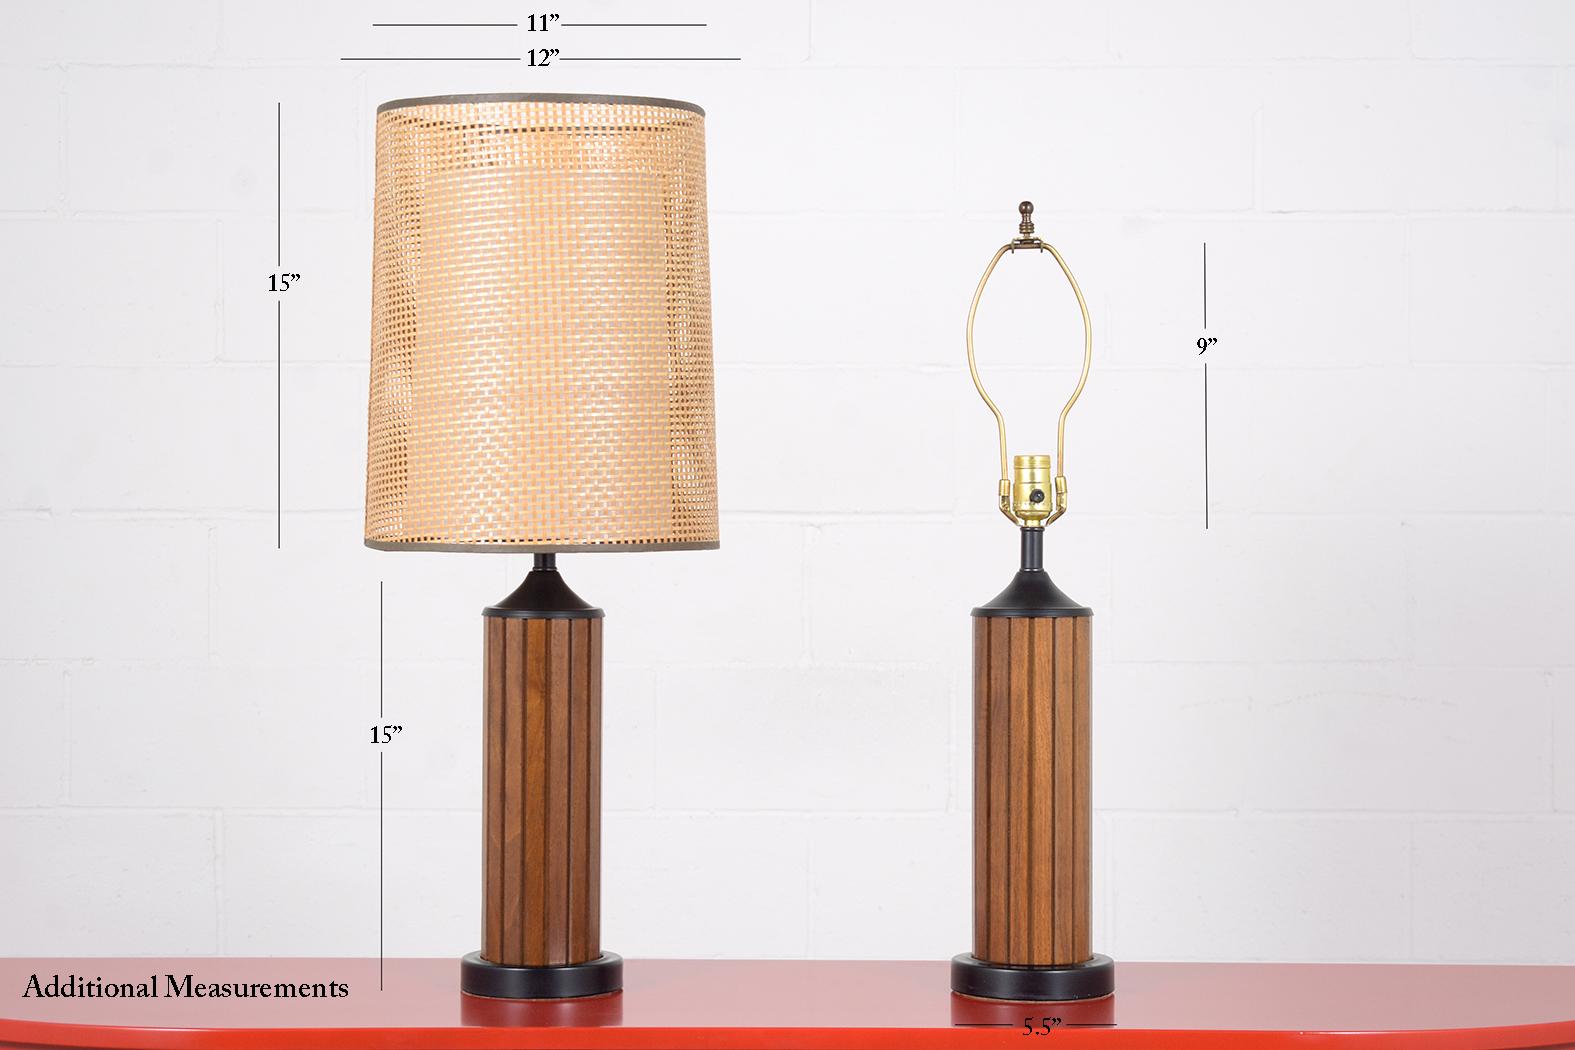 An extraordinary pair of mid-century table lamps executed out of wood and are in great condition newly refinished and wired by our expert craftsman team in-house. This pair of sleek table lamps features intricated round shades made out of cane